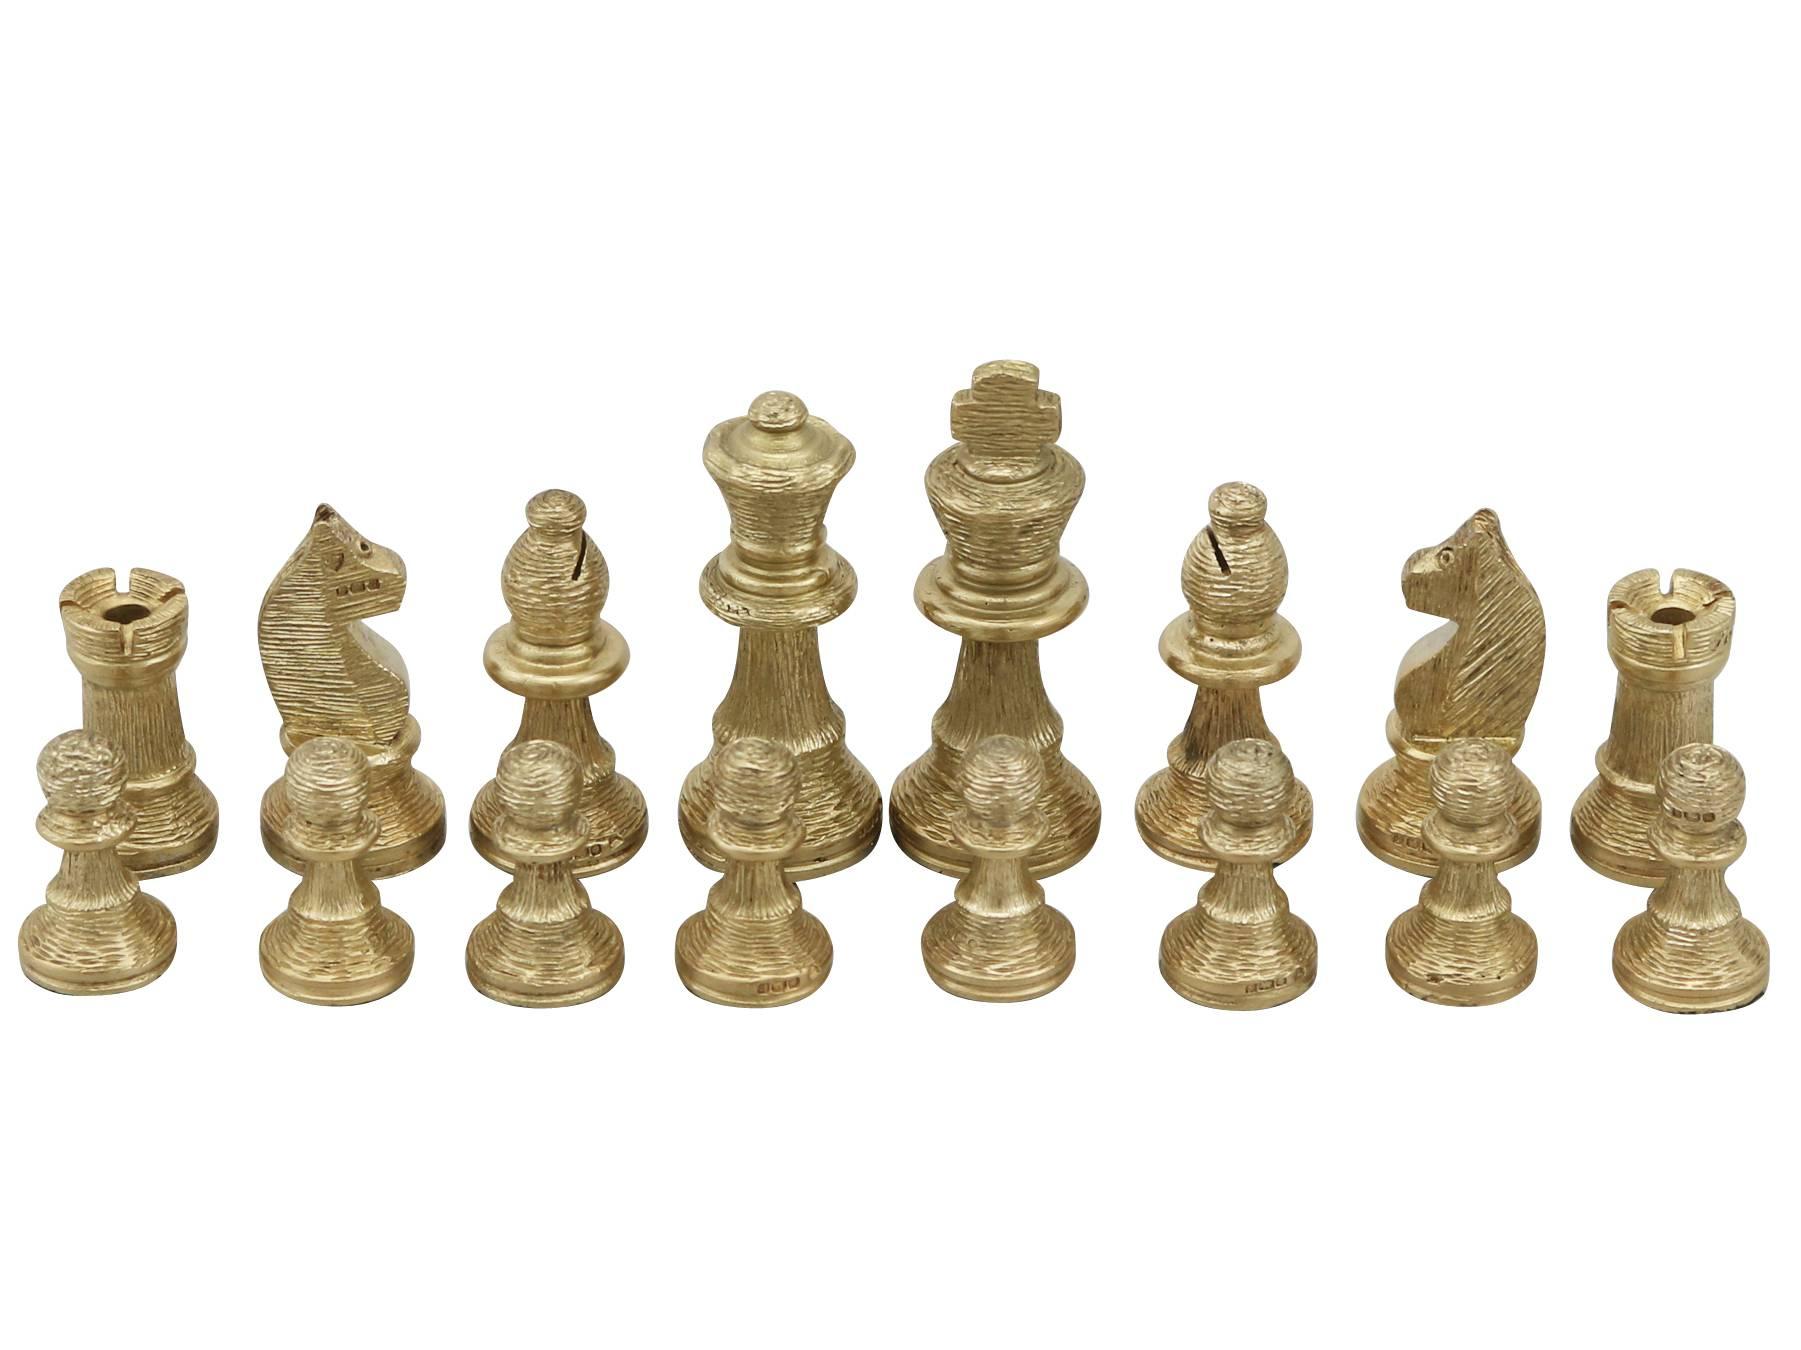 An exceptional, fine and impressive vintage Elizabeth II sterling silver and silver gilt chess set; an addition to our diverse ornamental silverware collection

This exceptional vintage cast sterling silver chess set is comprised of 32 chess